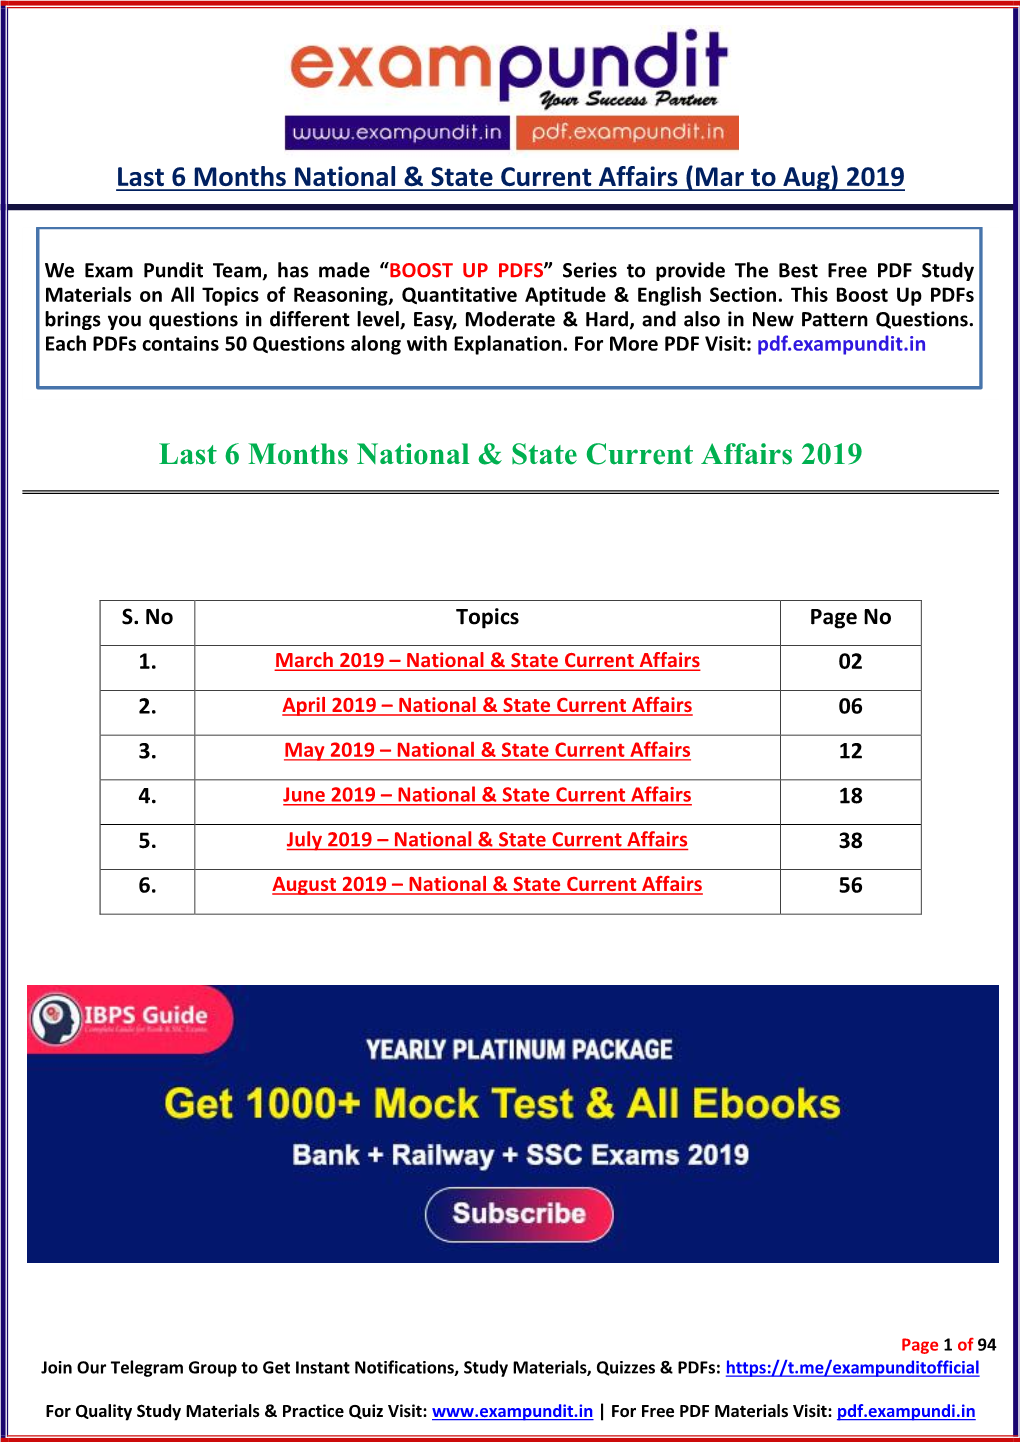 Last 6 Months National & State Current Affairs 2019